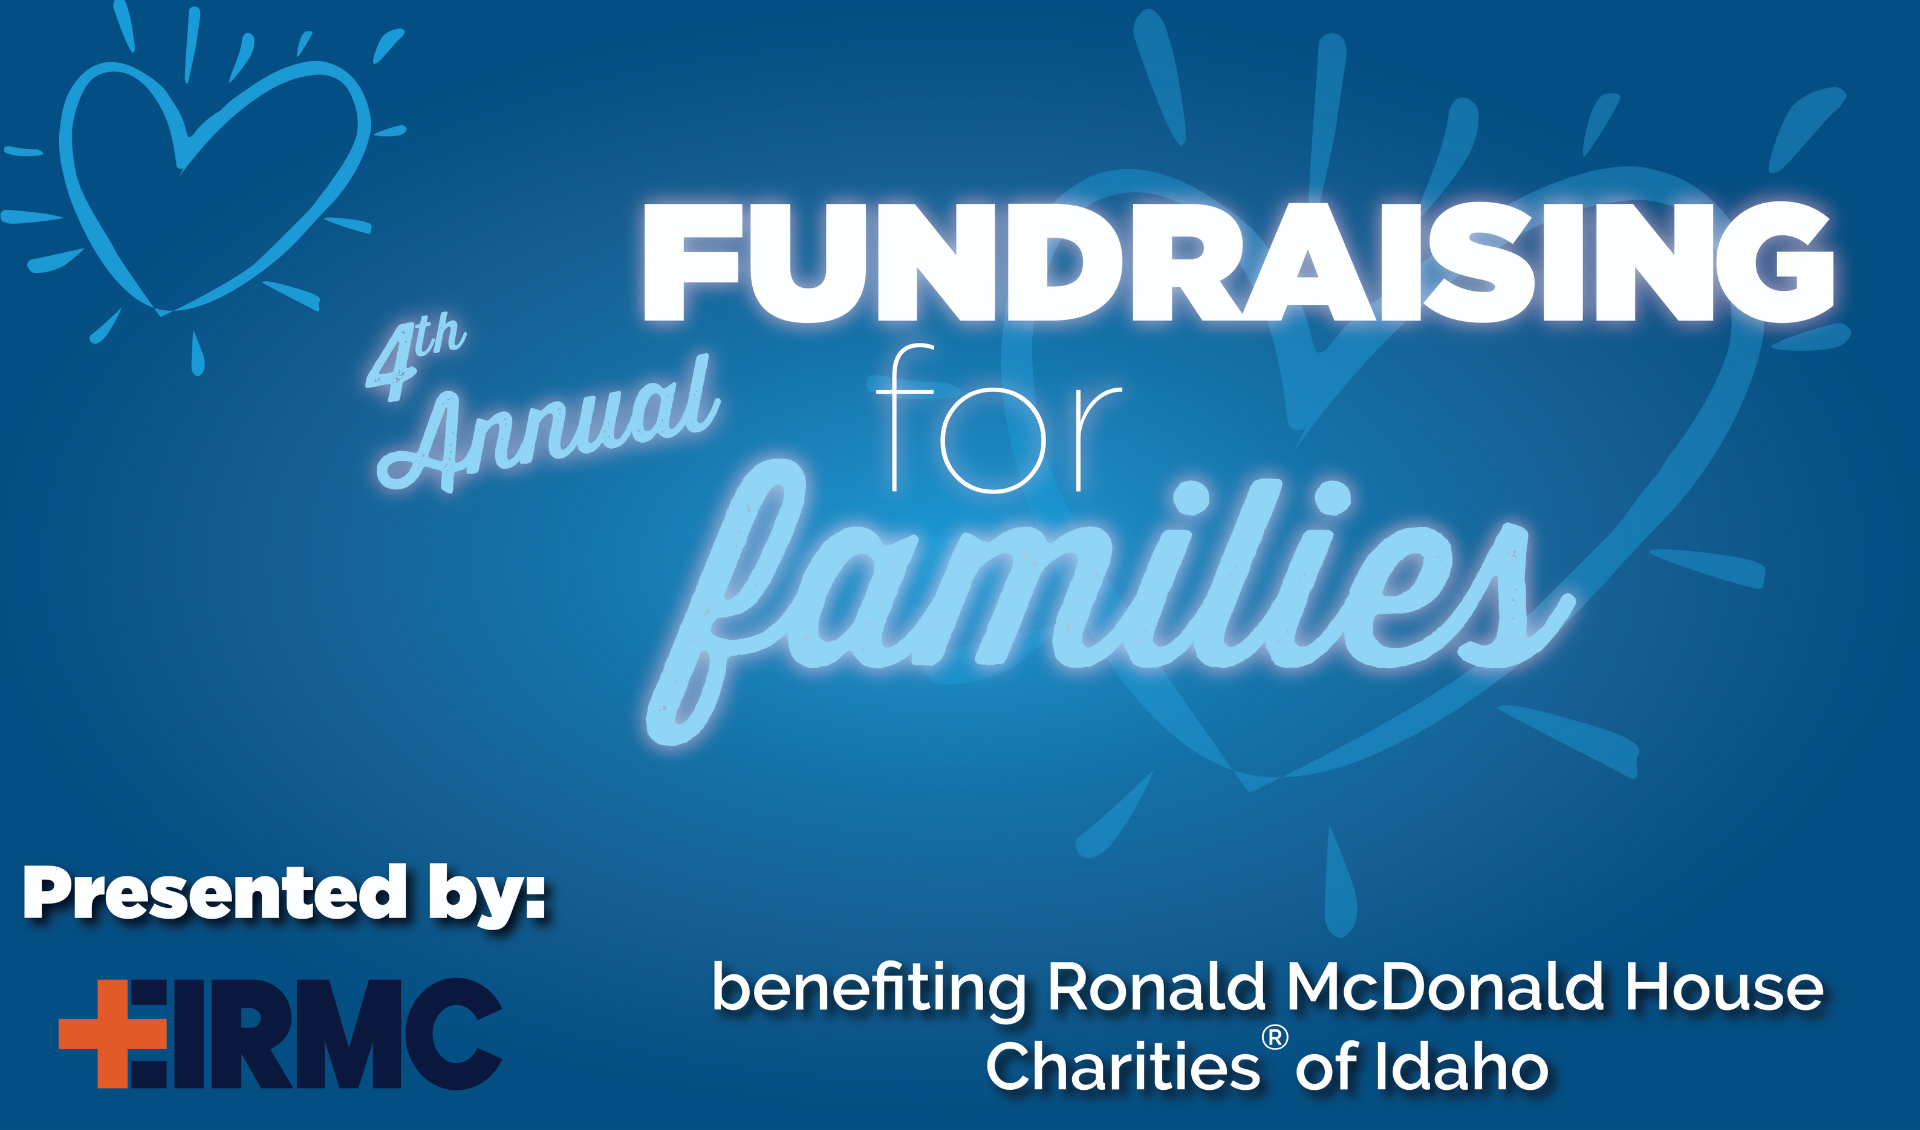 4th Annual Fundraising for Families Website Image